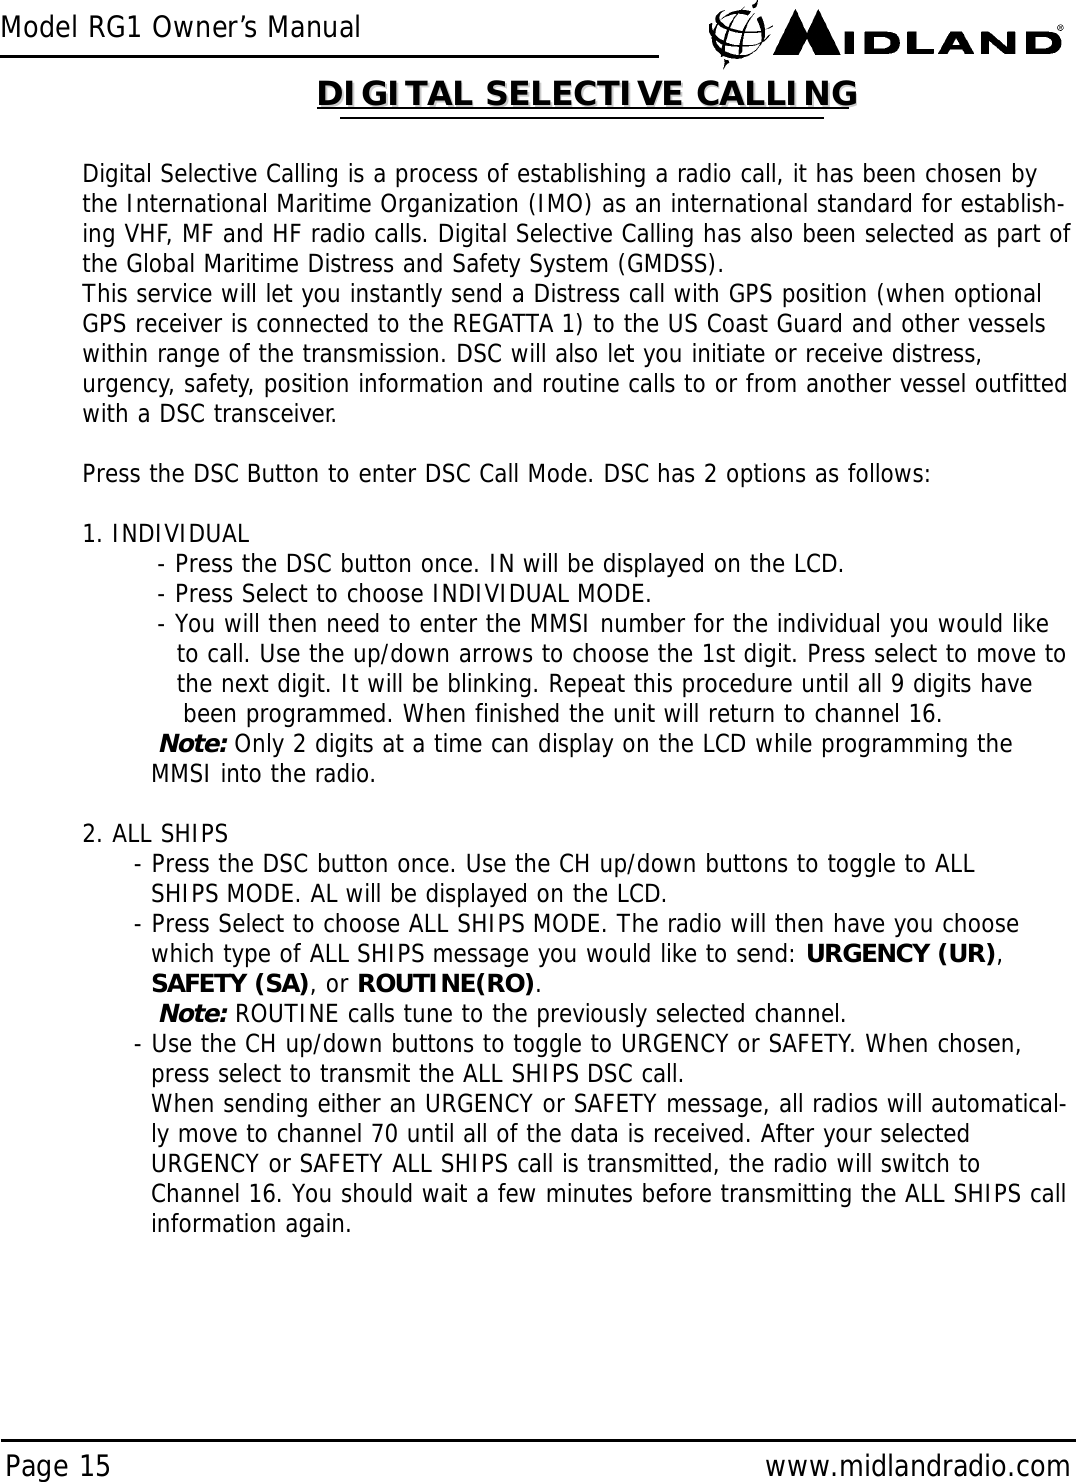 Model RG1 Owner’s ManualPage 15 www.midlandradio.comDigital Selective Calling is a process of establishing a radio call, it has been chosen bythe International Maritime Organization (IMO) as an international standard for establish-ing VHF, MF and HF radio calls. Digital Selective Calling has also been selected as part ofthe Global Maritime Distress and Safety System (GMDSS).This service will let you instantly send a Distress call with GPS position (when optionalGPS receiver is connected to the REGATTA 1) to the US Coast Guard and other vesselswithin range of the transmission. DSC will also let you initiate or receive distress,urgency, safety, position information and routine calls to or from another vessel outfittedwith a DSC transceiver.Press the DSC Button to enter DSC Call Mode. DSC has 2 options as follows:1. INDIVIDUAL- Press the DSC button once. IN will be displayed on the LCD.- Press Select to choose INDIVIDUAL MODE.- You will then need to enter the MMSI number for the individual you would like to call. Use the up/down arrows to choose the 1st digit. Press select to move to the next digit. It will be blinking. Repeat this procedure until all 9 digits have been programmed. When finished the unit will return to channel 16.Note: Only 2 digits at a time can display on the LCD while programming the MMSI into the radio.2. ALL SHIPS- Press the DSC button once. Use the CH up/down buttons to toggle to ALLSHIPS MODE. AL will be displayed on the LCD.- Press Select to choose ALL SHIPS MODE. The radio will then have you choose which type of ALL SHIPS message you would like to send: URGENCY (UR), SAFETY (SA), or ROUTINE(RO).Note:ROUTINE calls tune to the previously selected channel.- Use the CH up/down buttons to toggle to URGENCY or SAFETY. When chosen, press select to transmit the ALL SHIPS DSC call.When sending either an URGENCY or SAFETY message, all radios will automatical-ly move to channel 70 until all of the data is received. After your selected URGENCY or SAFETY ALL SHIPS call is transmitted, the radio will switch to Channel 16. You should wait a few minutes before transmitting the ALL SHIPS call information again.DIGITAL SELECTIVE CALLINGDIGITAL SELECTIVE CALLING